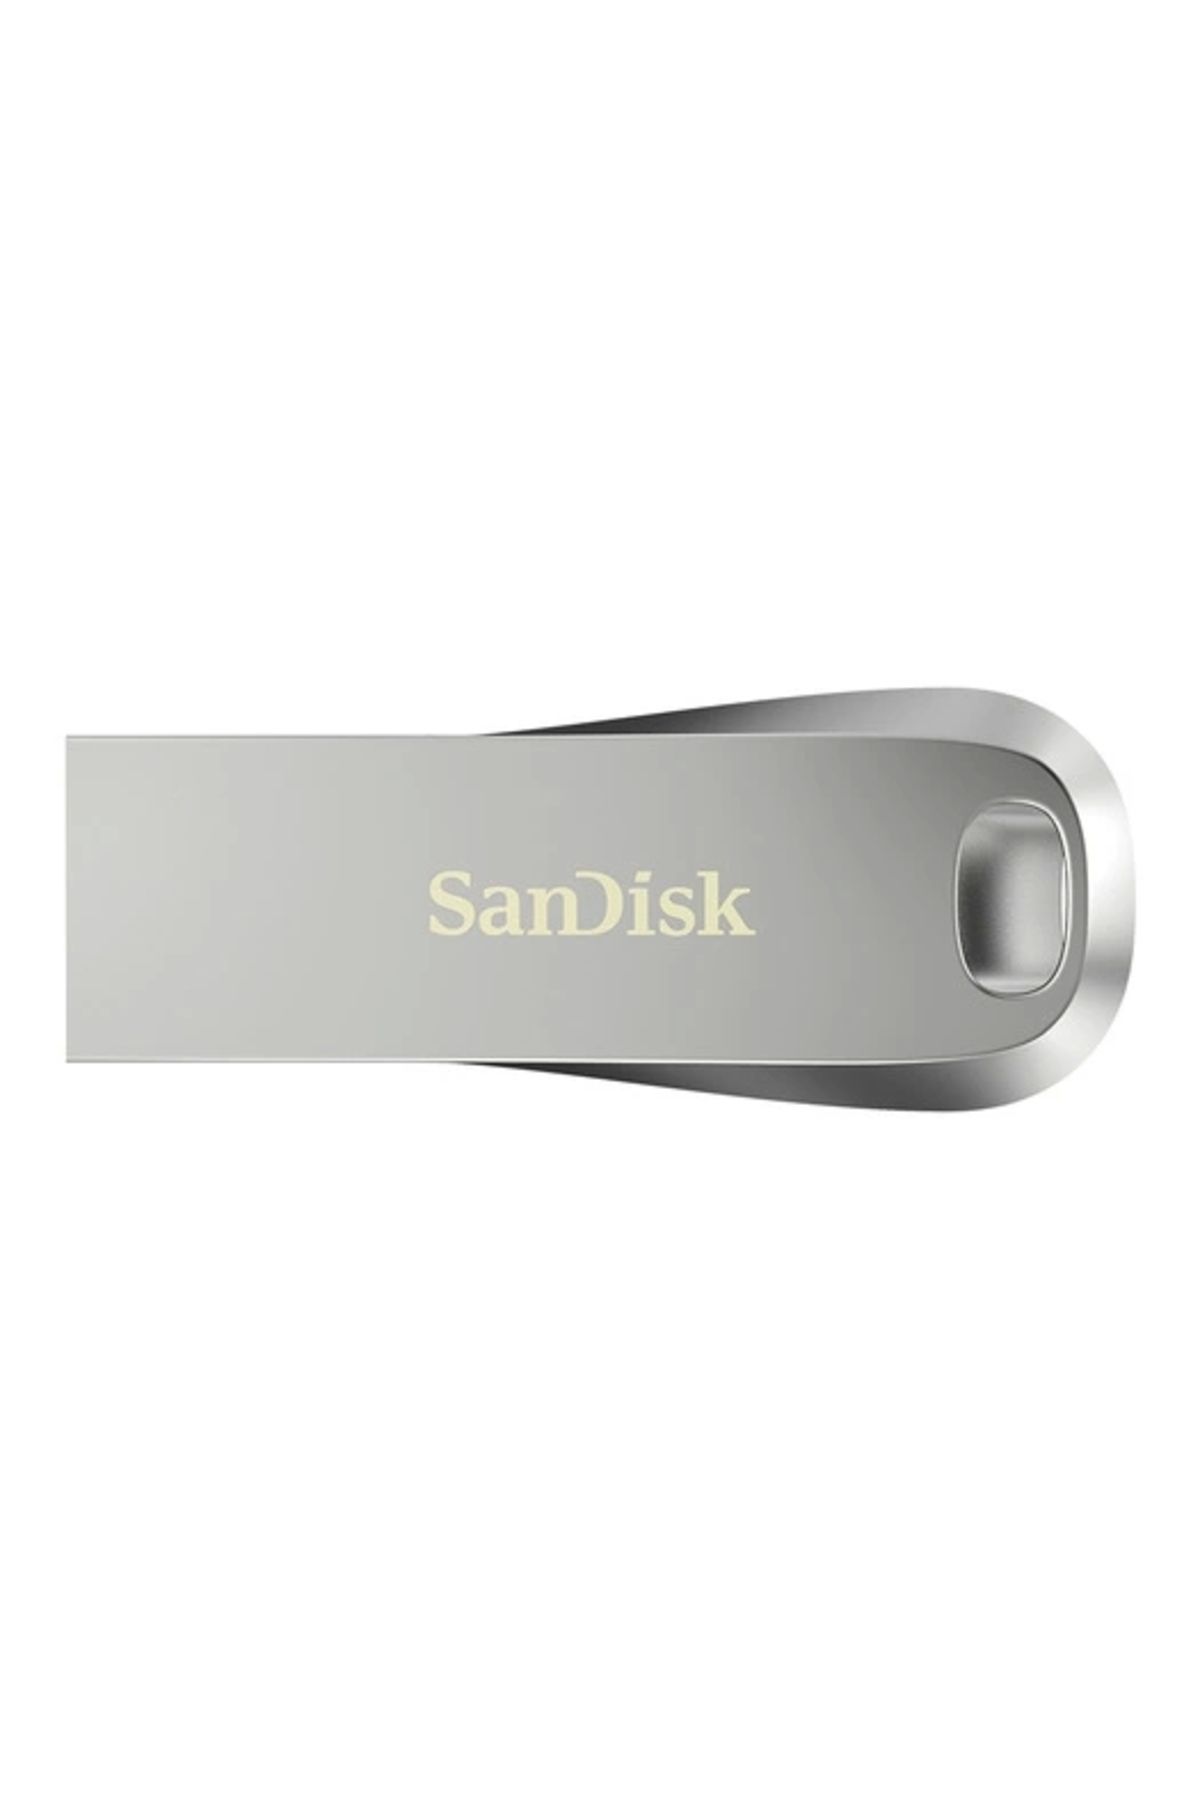 Sandisk Ultra Luxe USB 3.1 150 MB/s 32GB